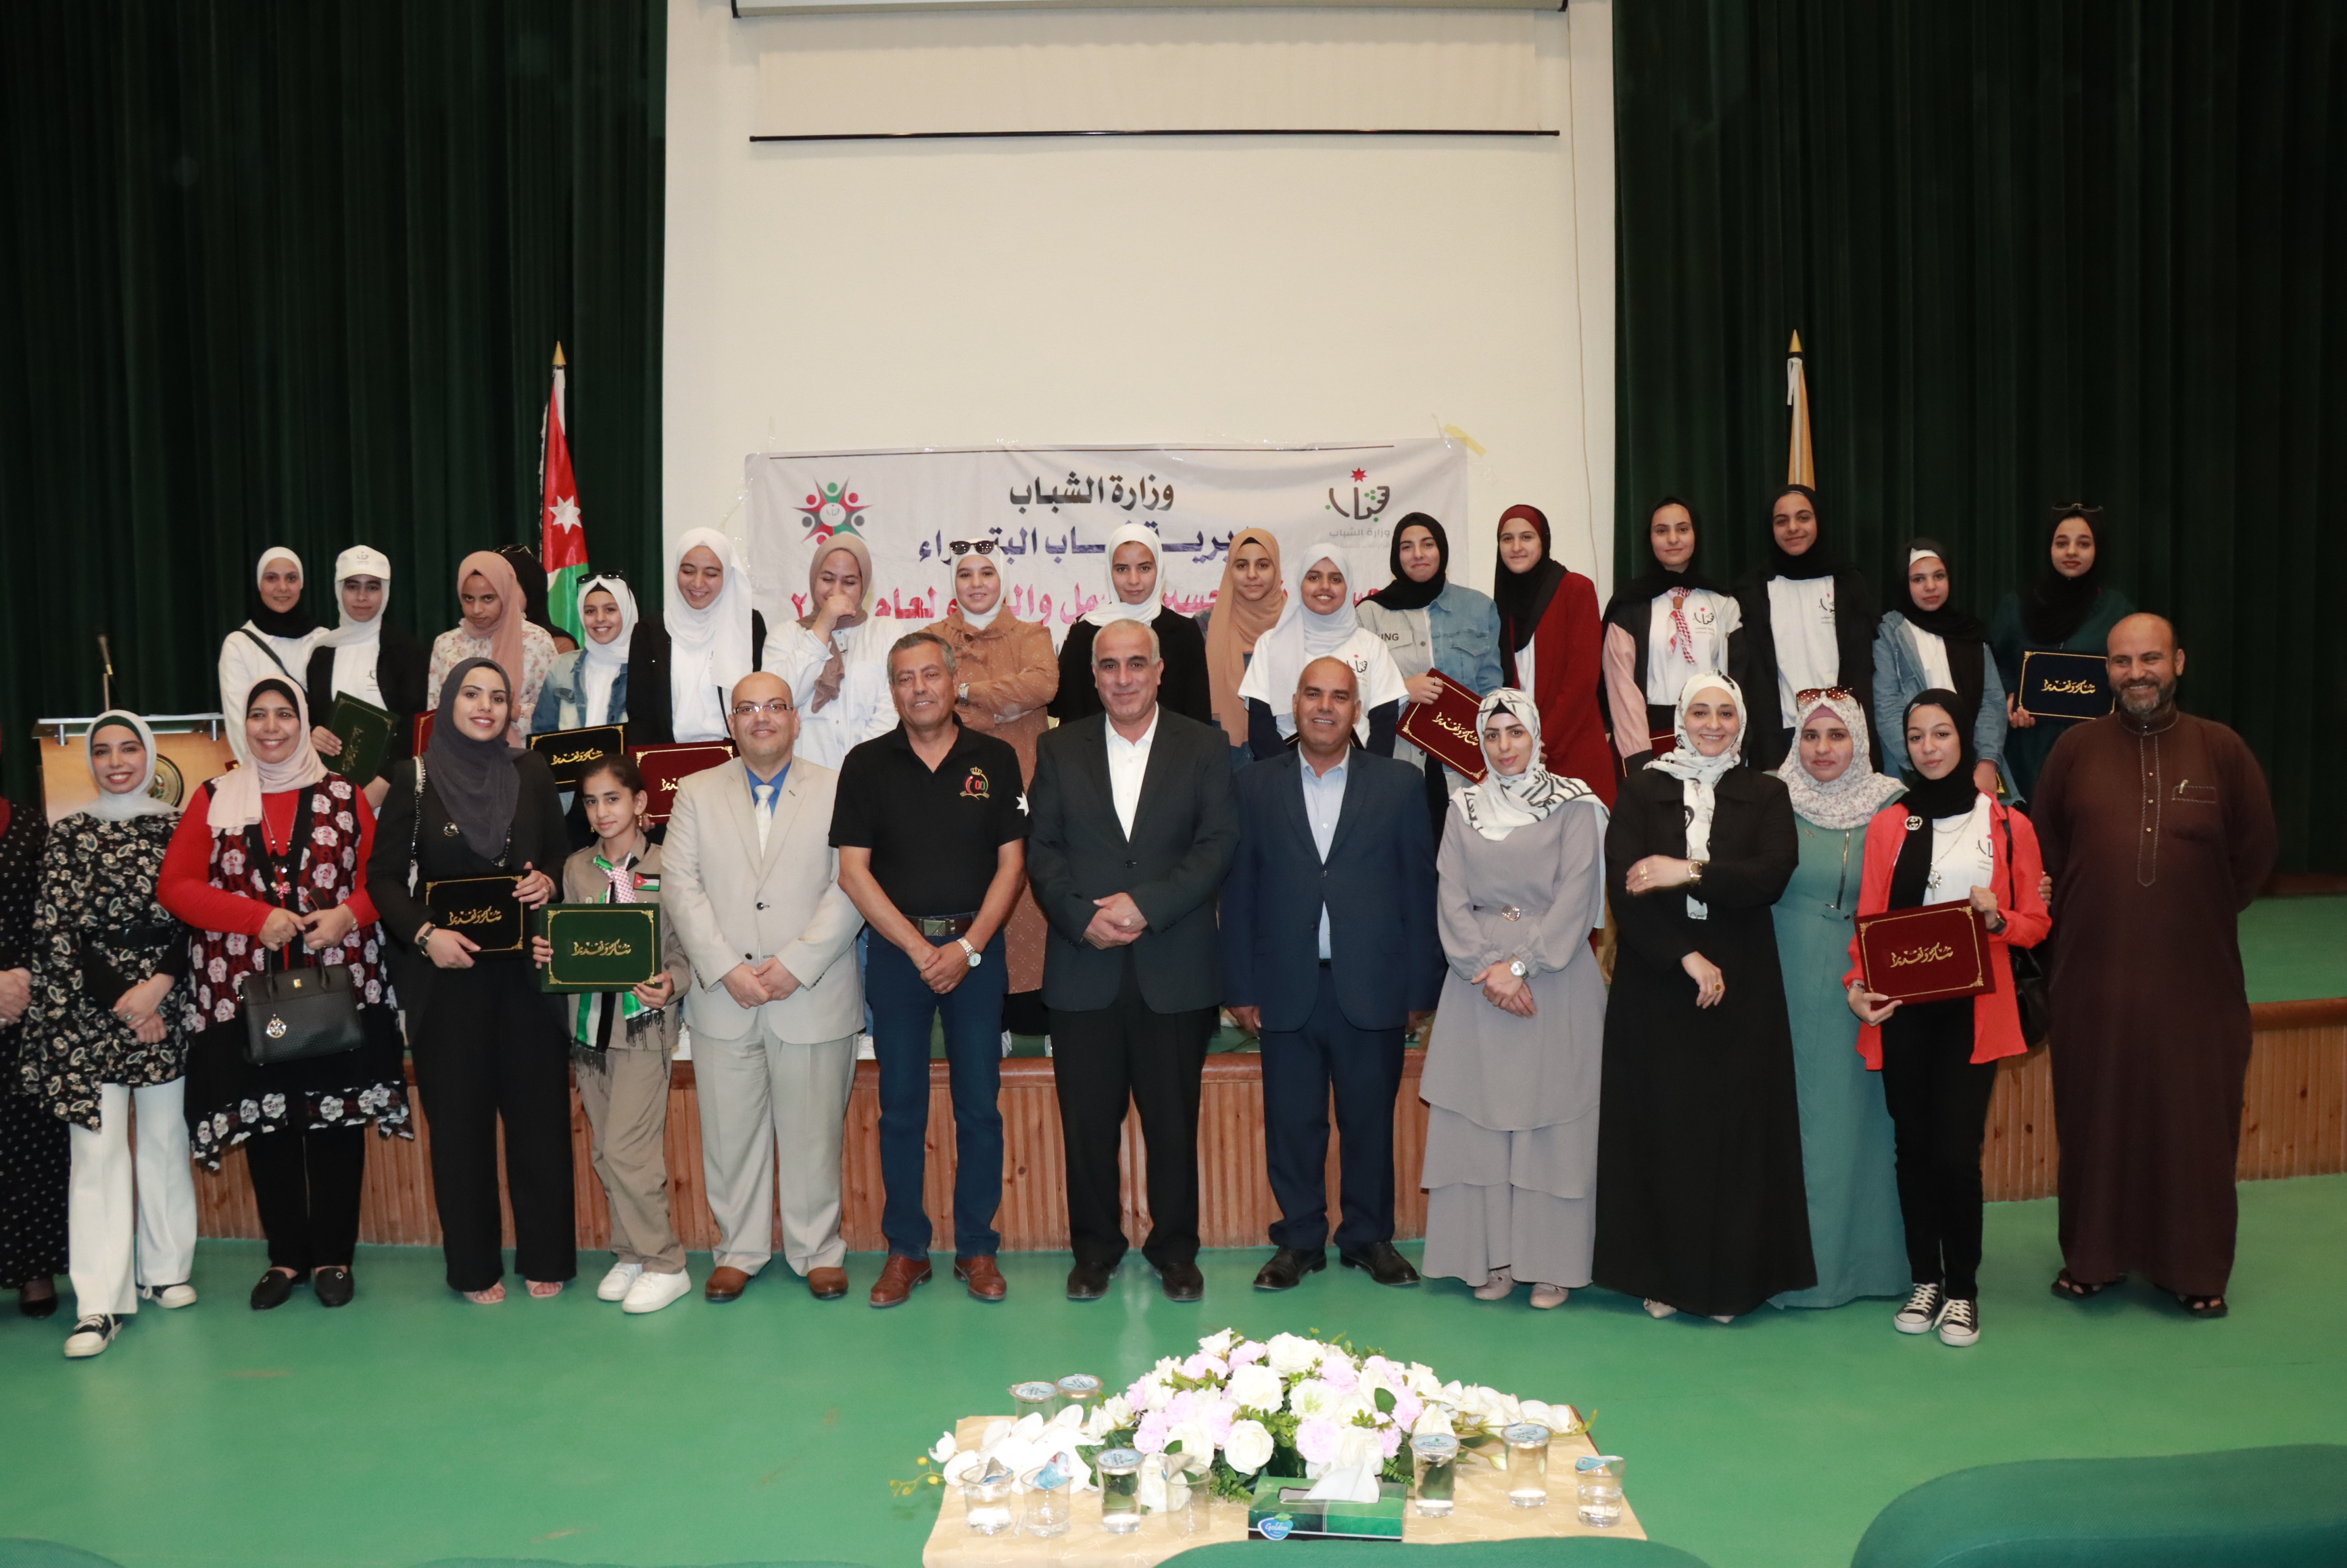 The President of Al-Hussein Bin Talal University sponsors the graduation ceremony of the participants in the Al-Hussein Labor and Construction Camps.